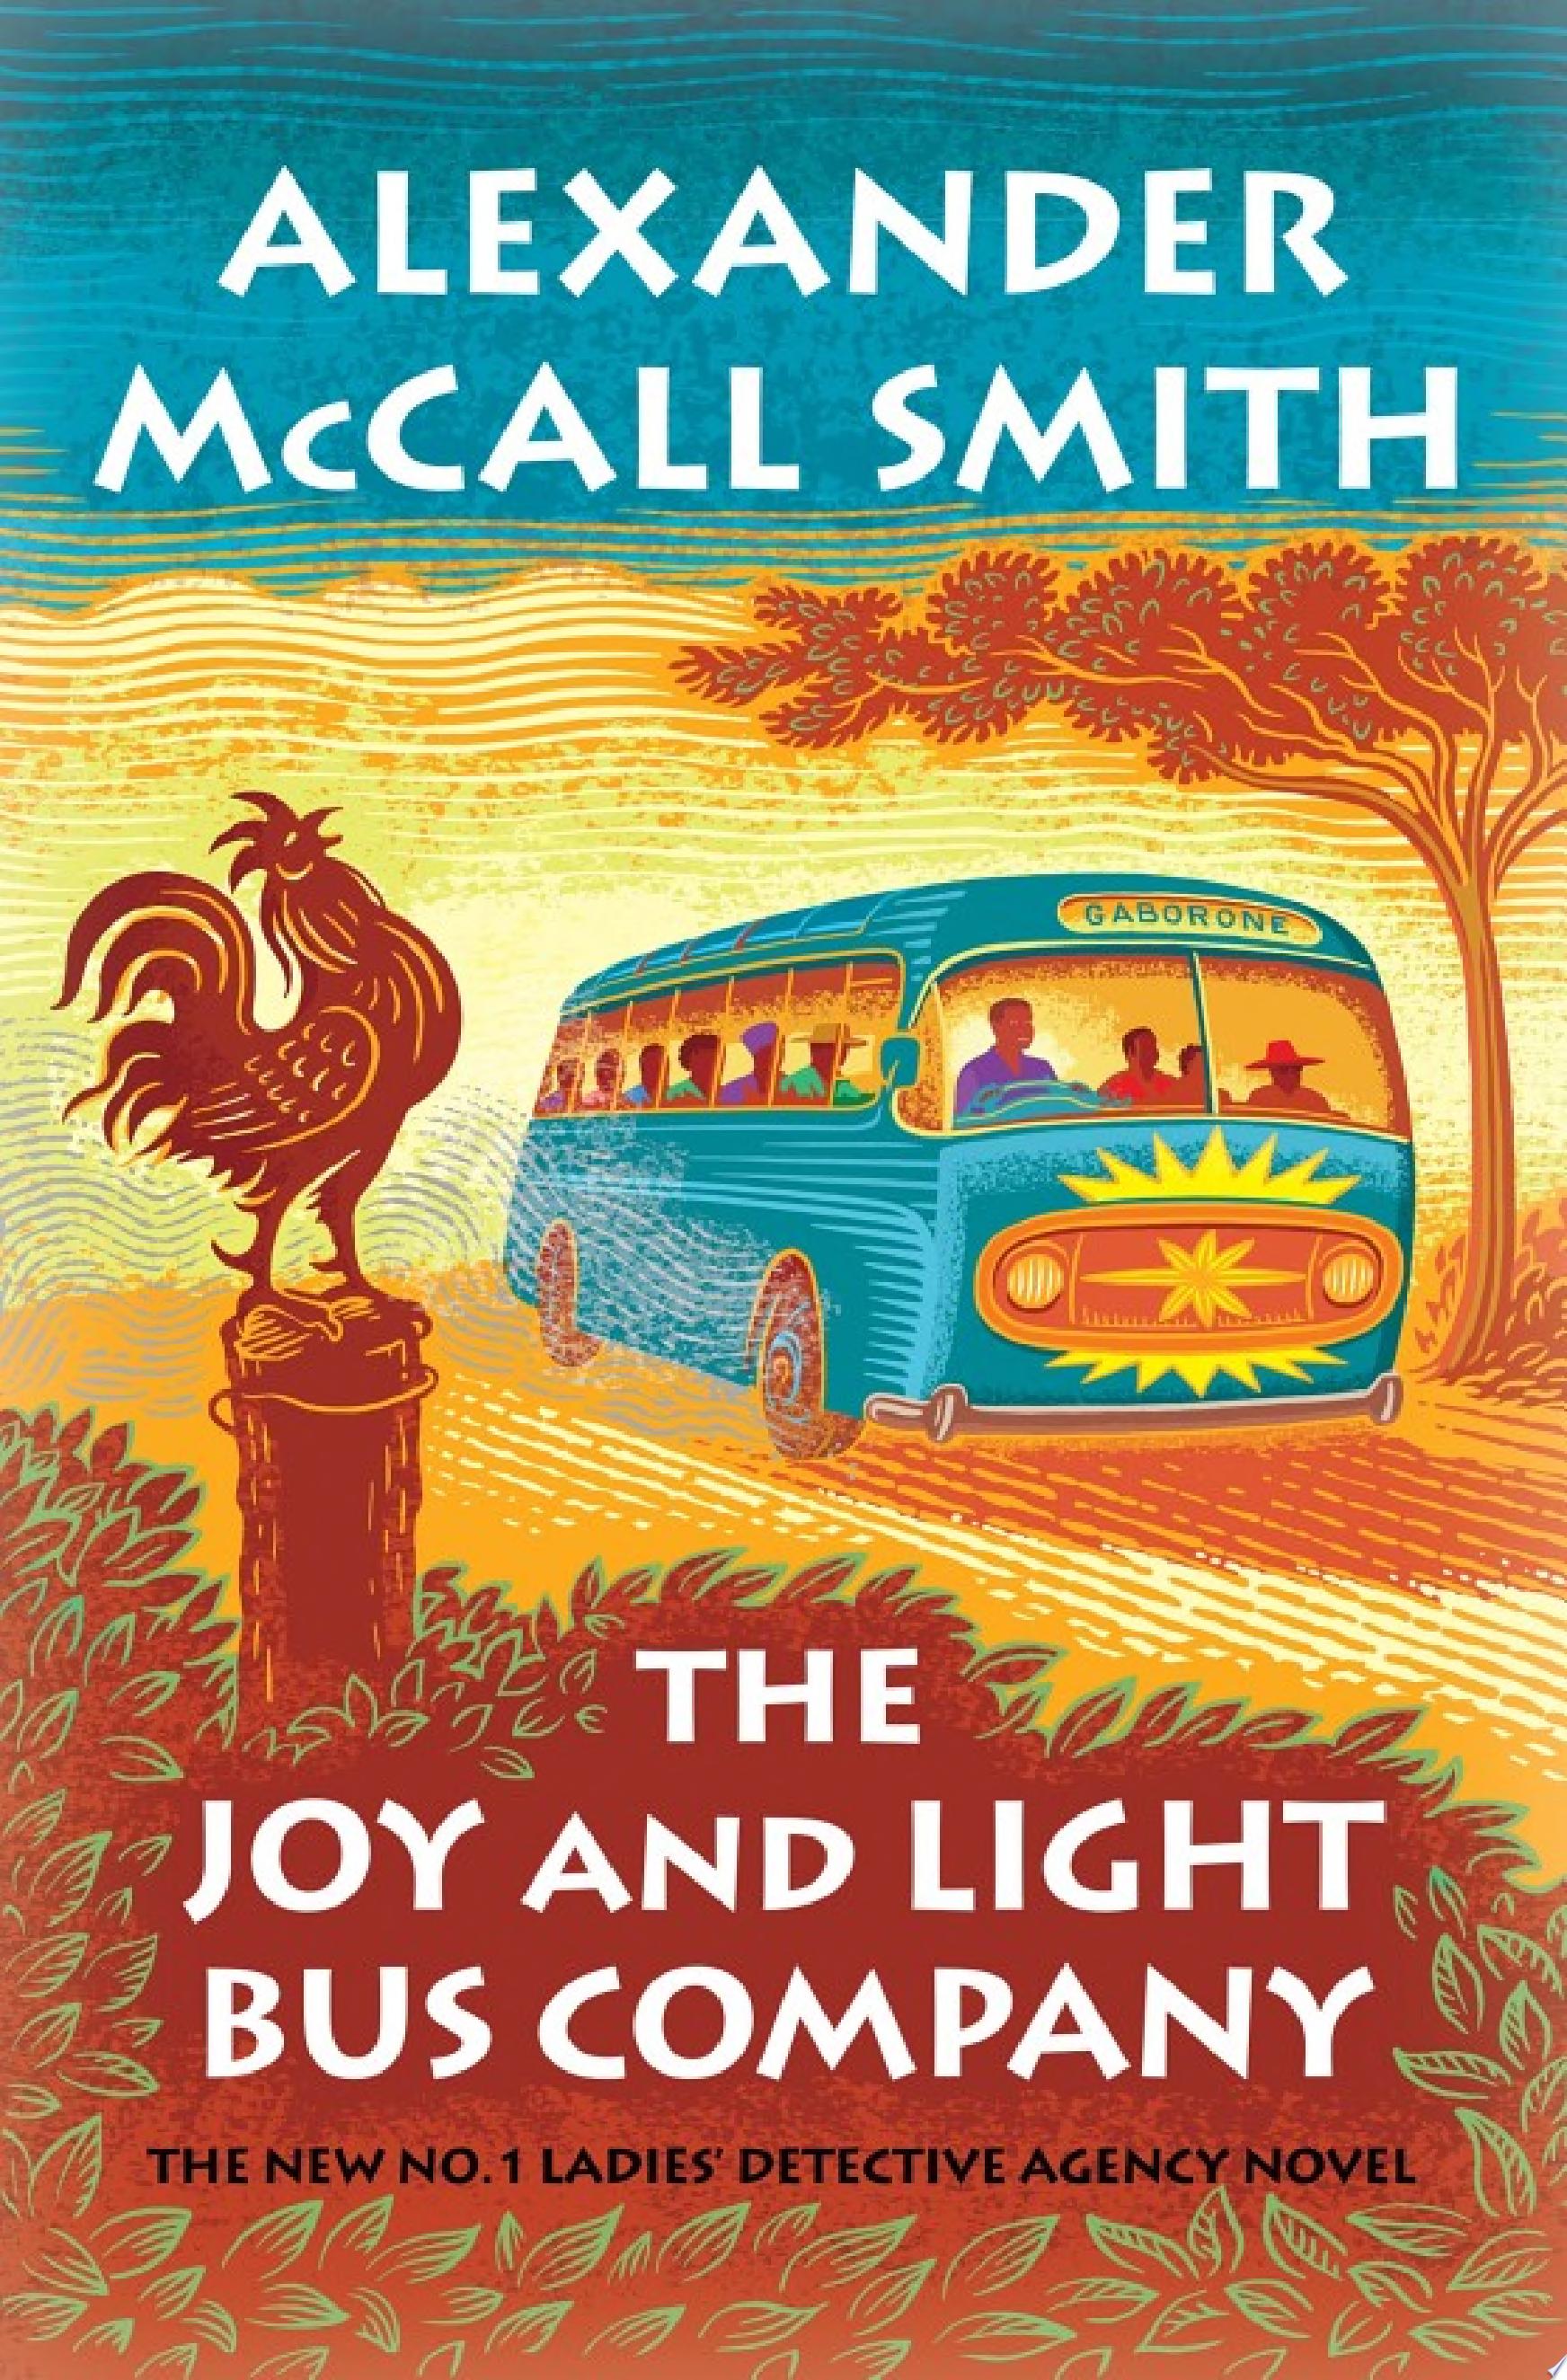 Image for "The Joy and Light Bus Company"